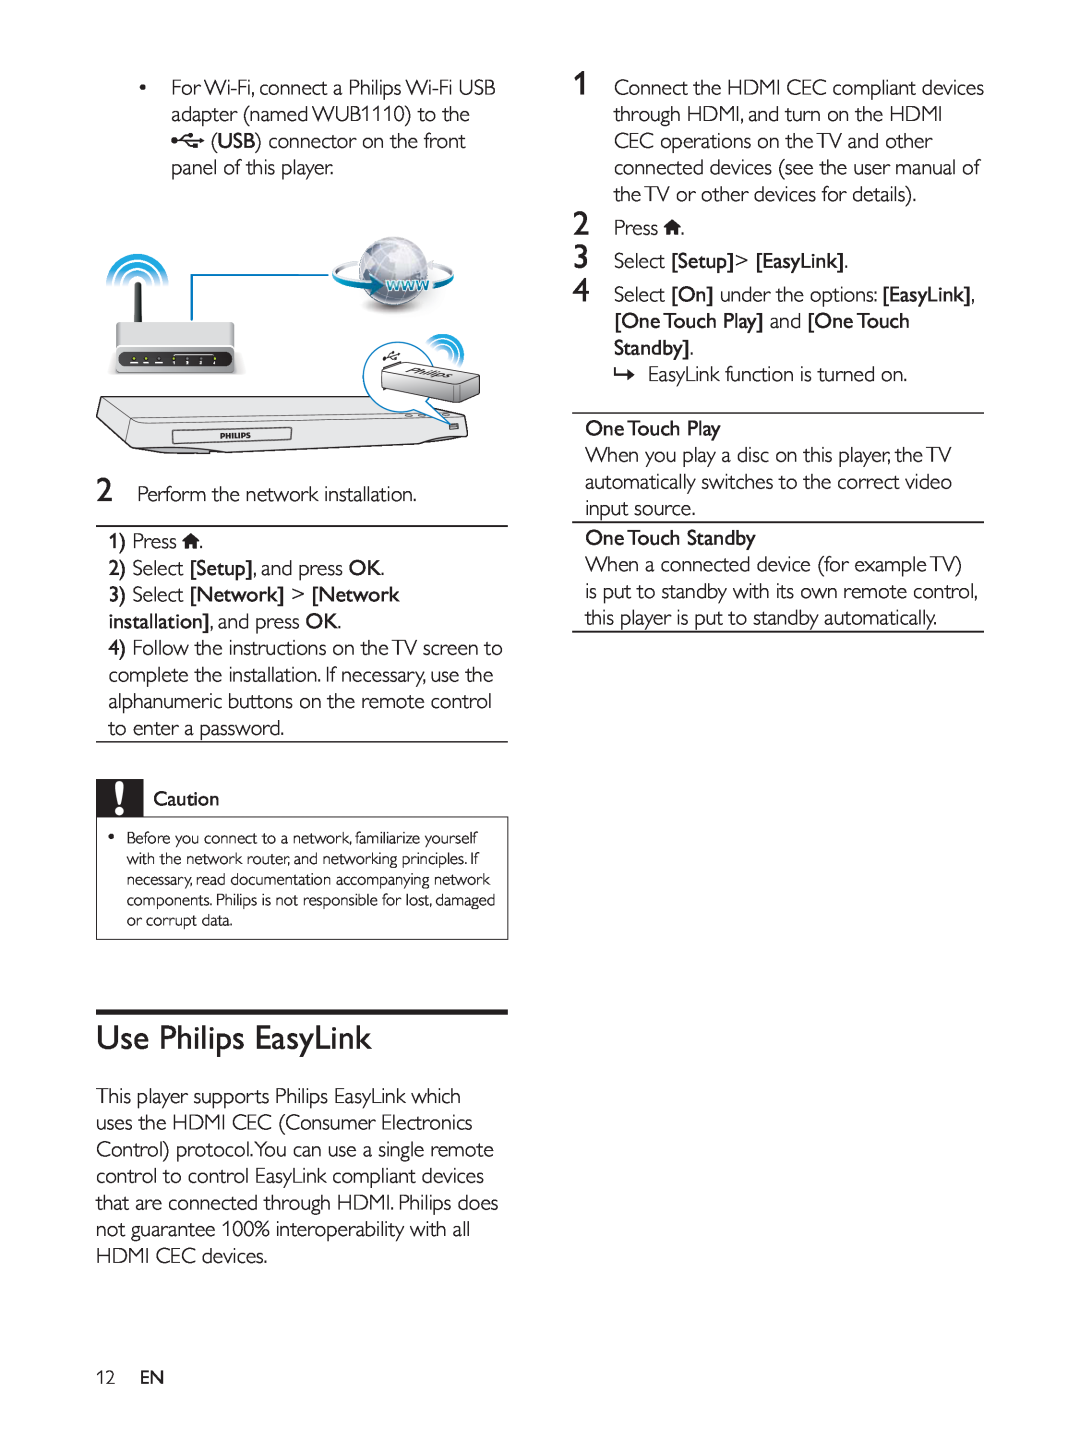 Philips BDP2930 user manual Use Philips EasyLink, Perform the network installation 1 Press, Select Setup, and press OK 